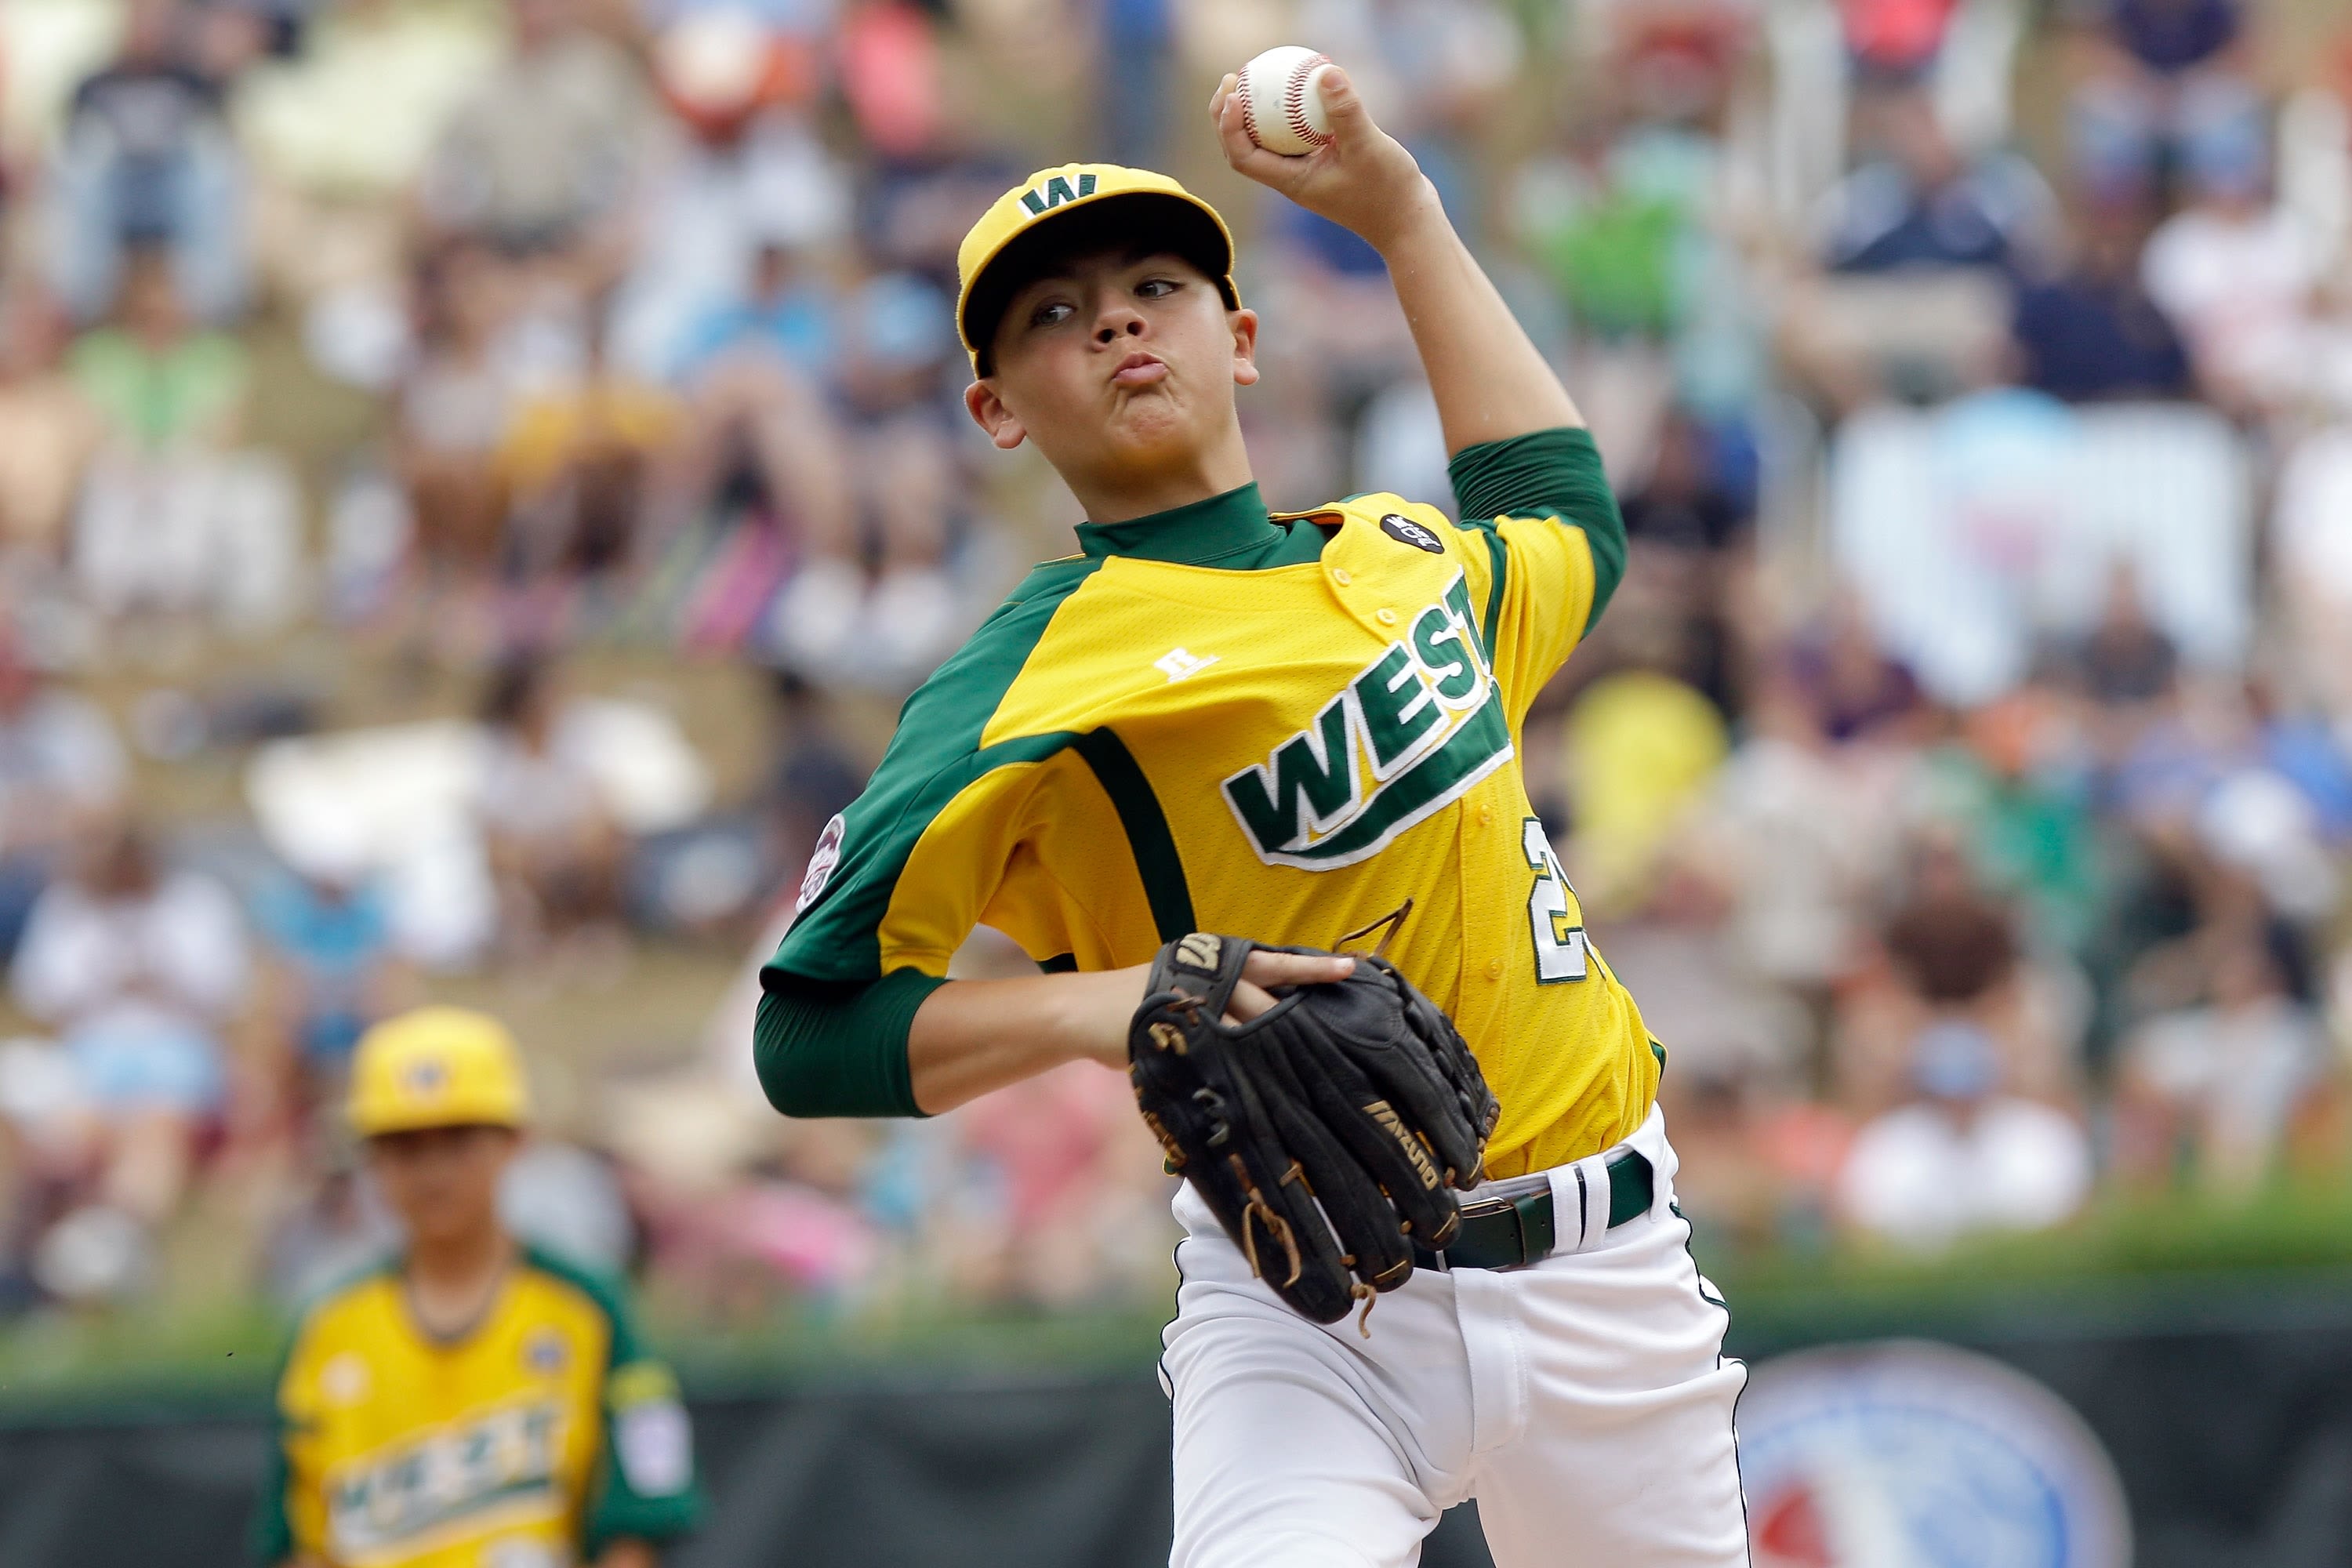 Should curveballs be banned in Little League Baseball?